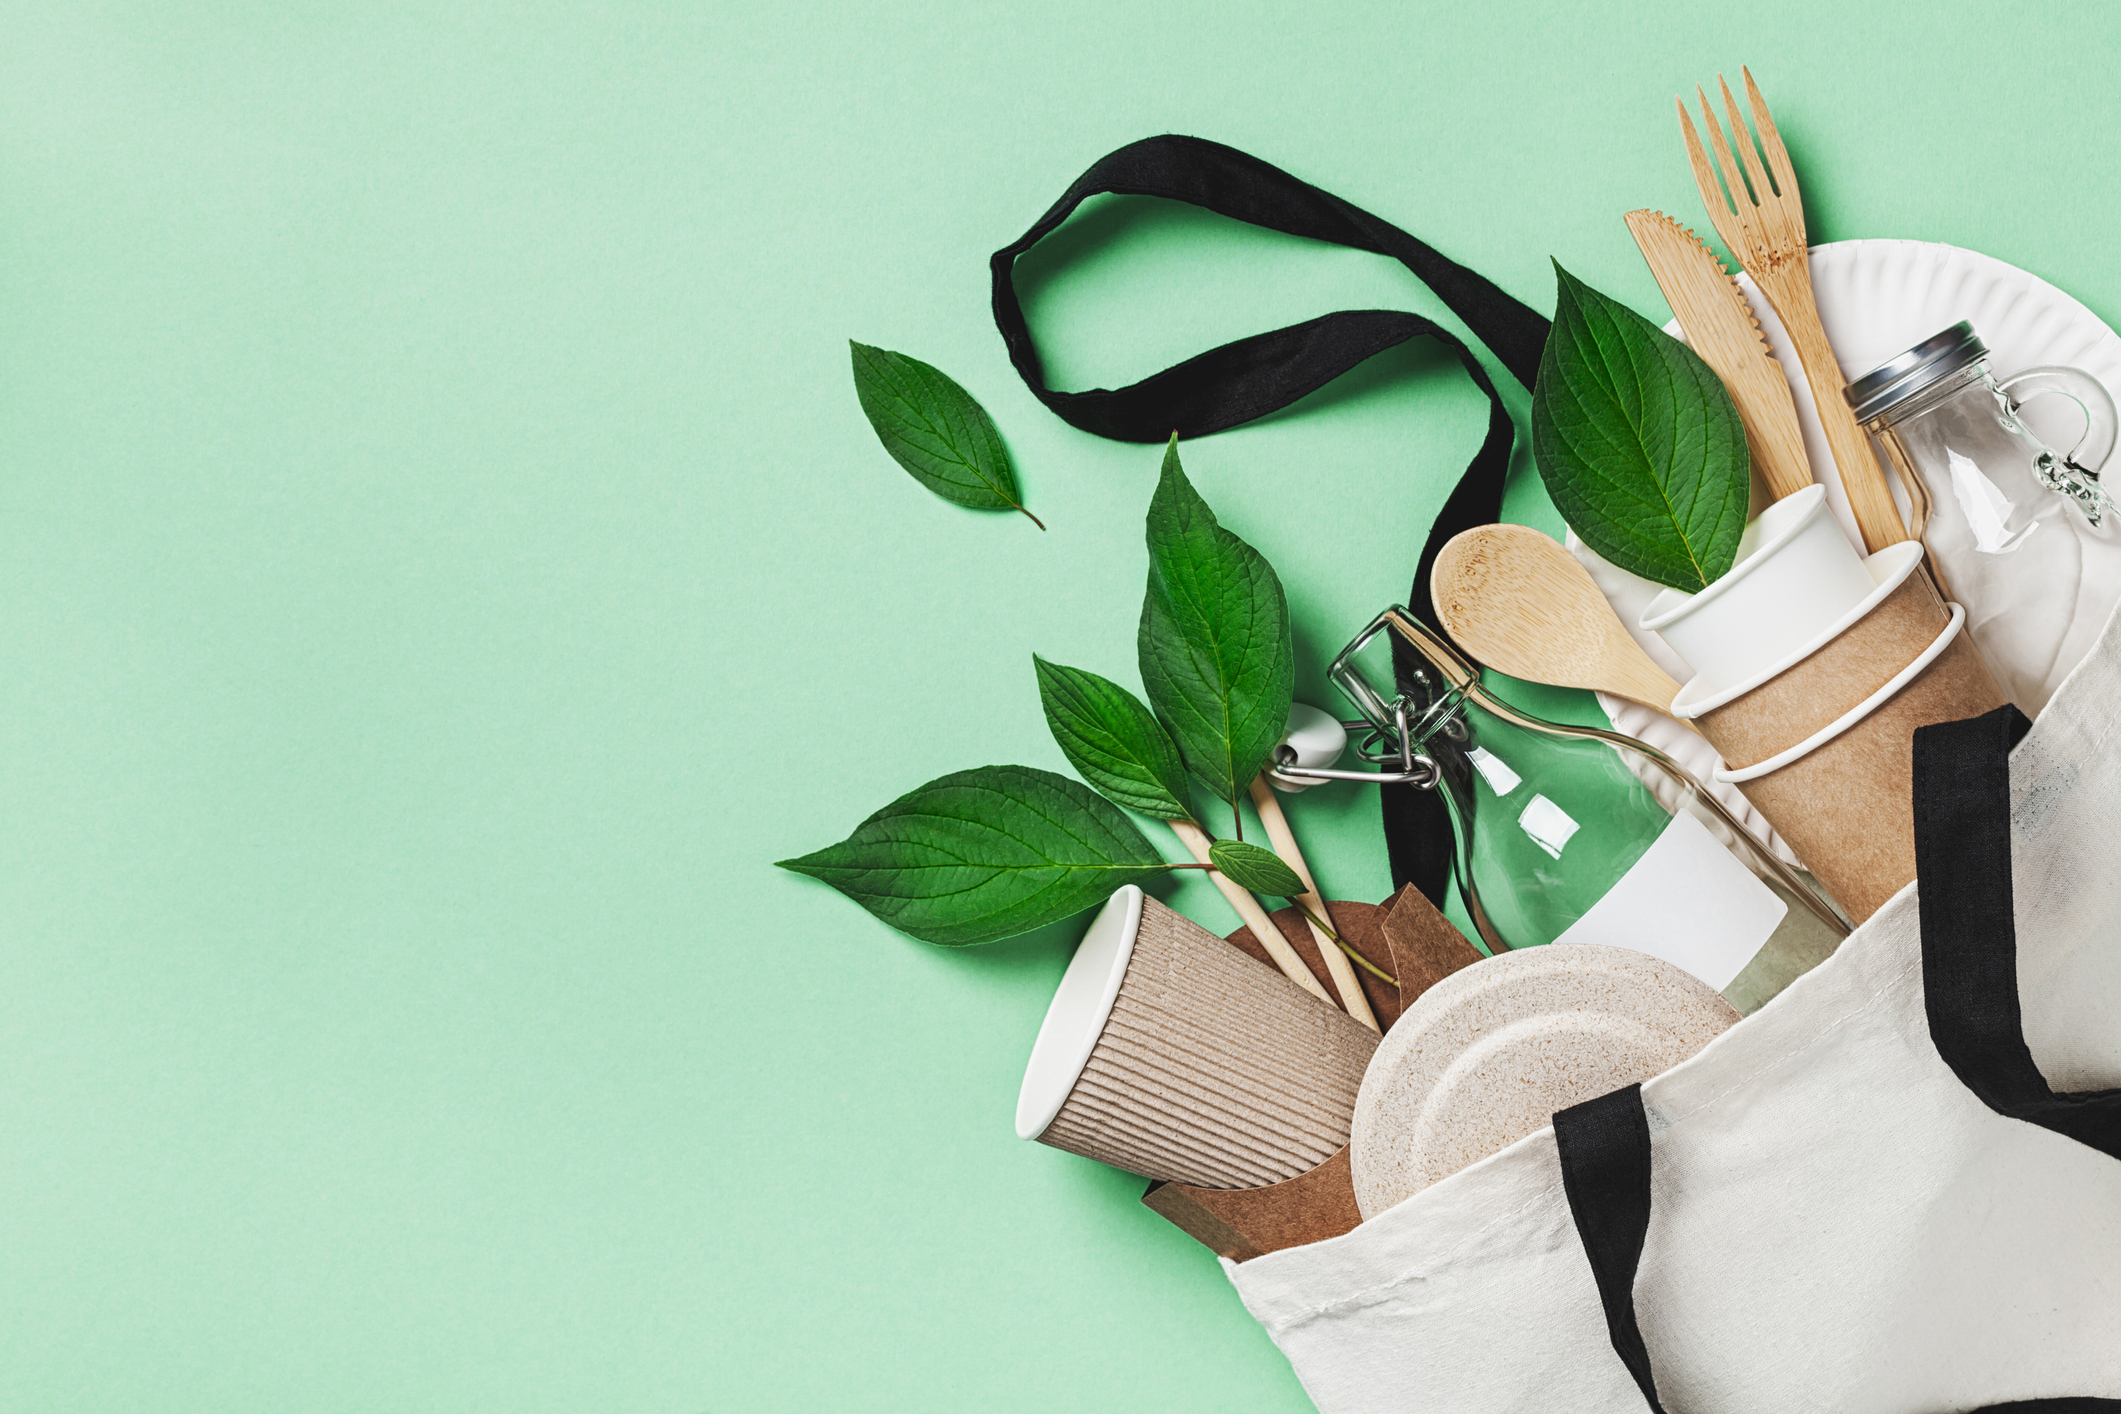 reusable bag, utensils, and other eco friendly items to help you live zero waste